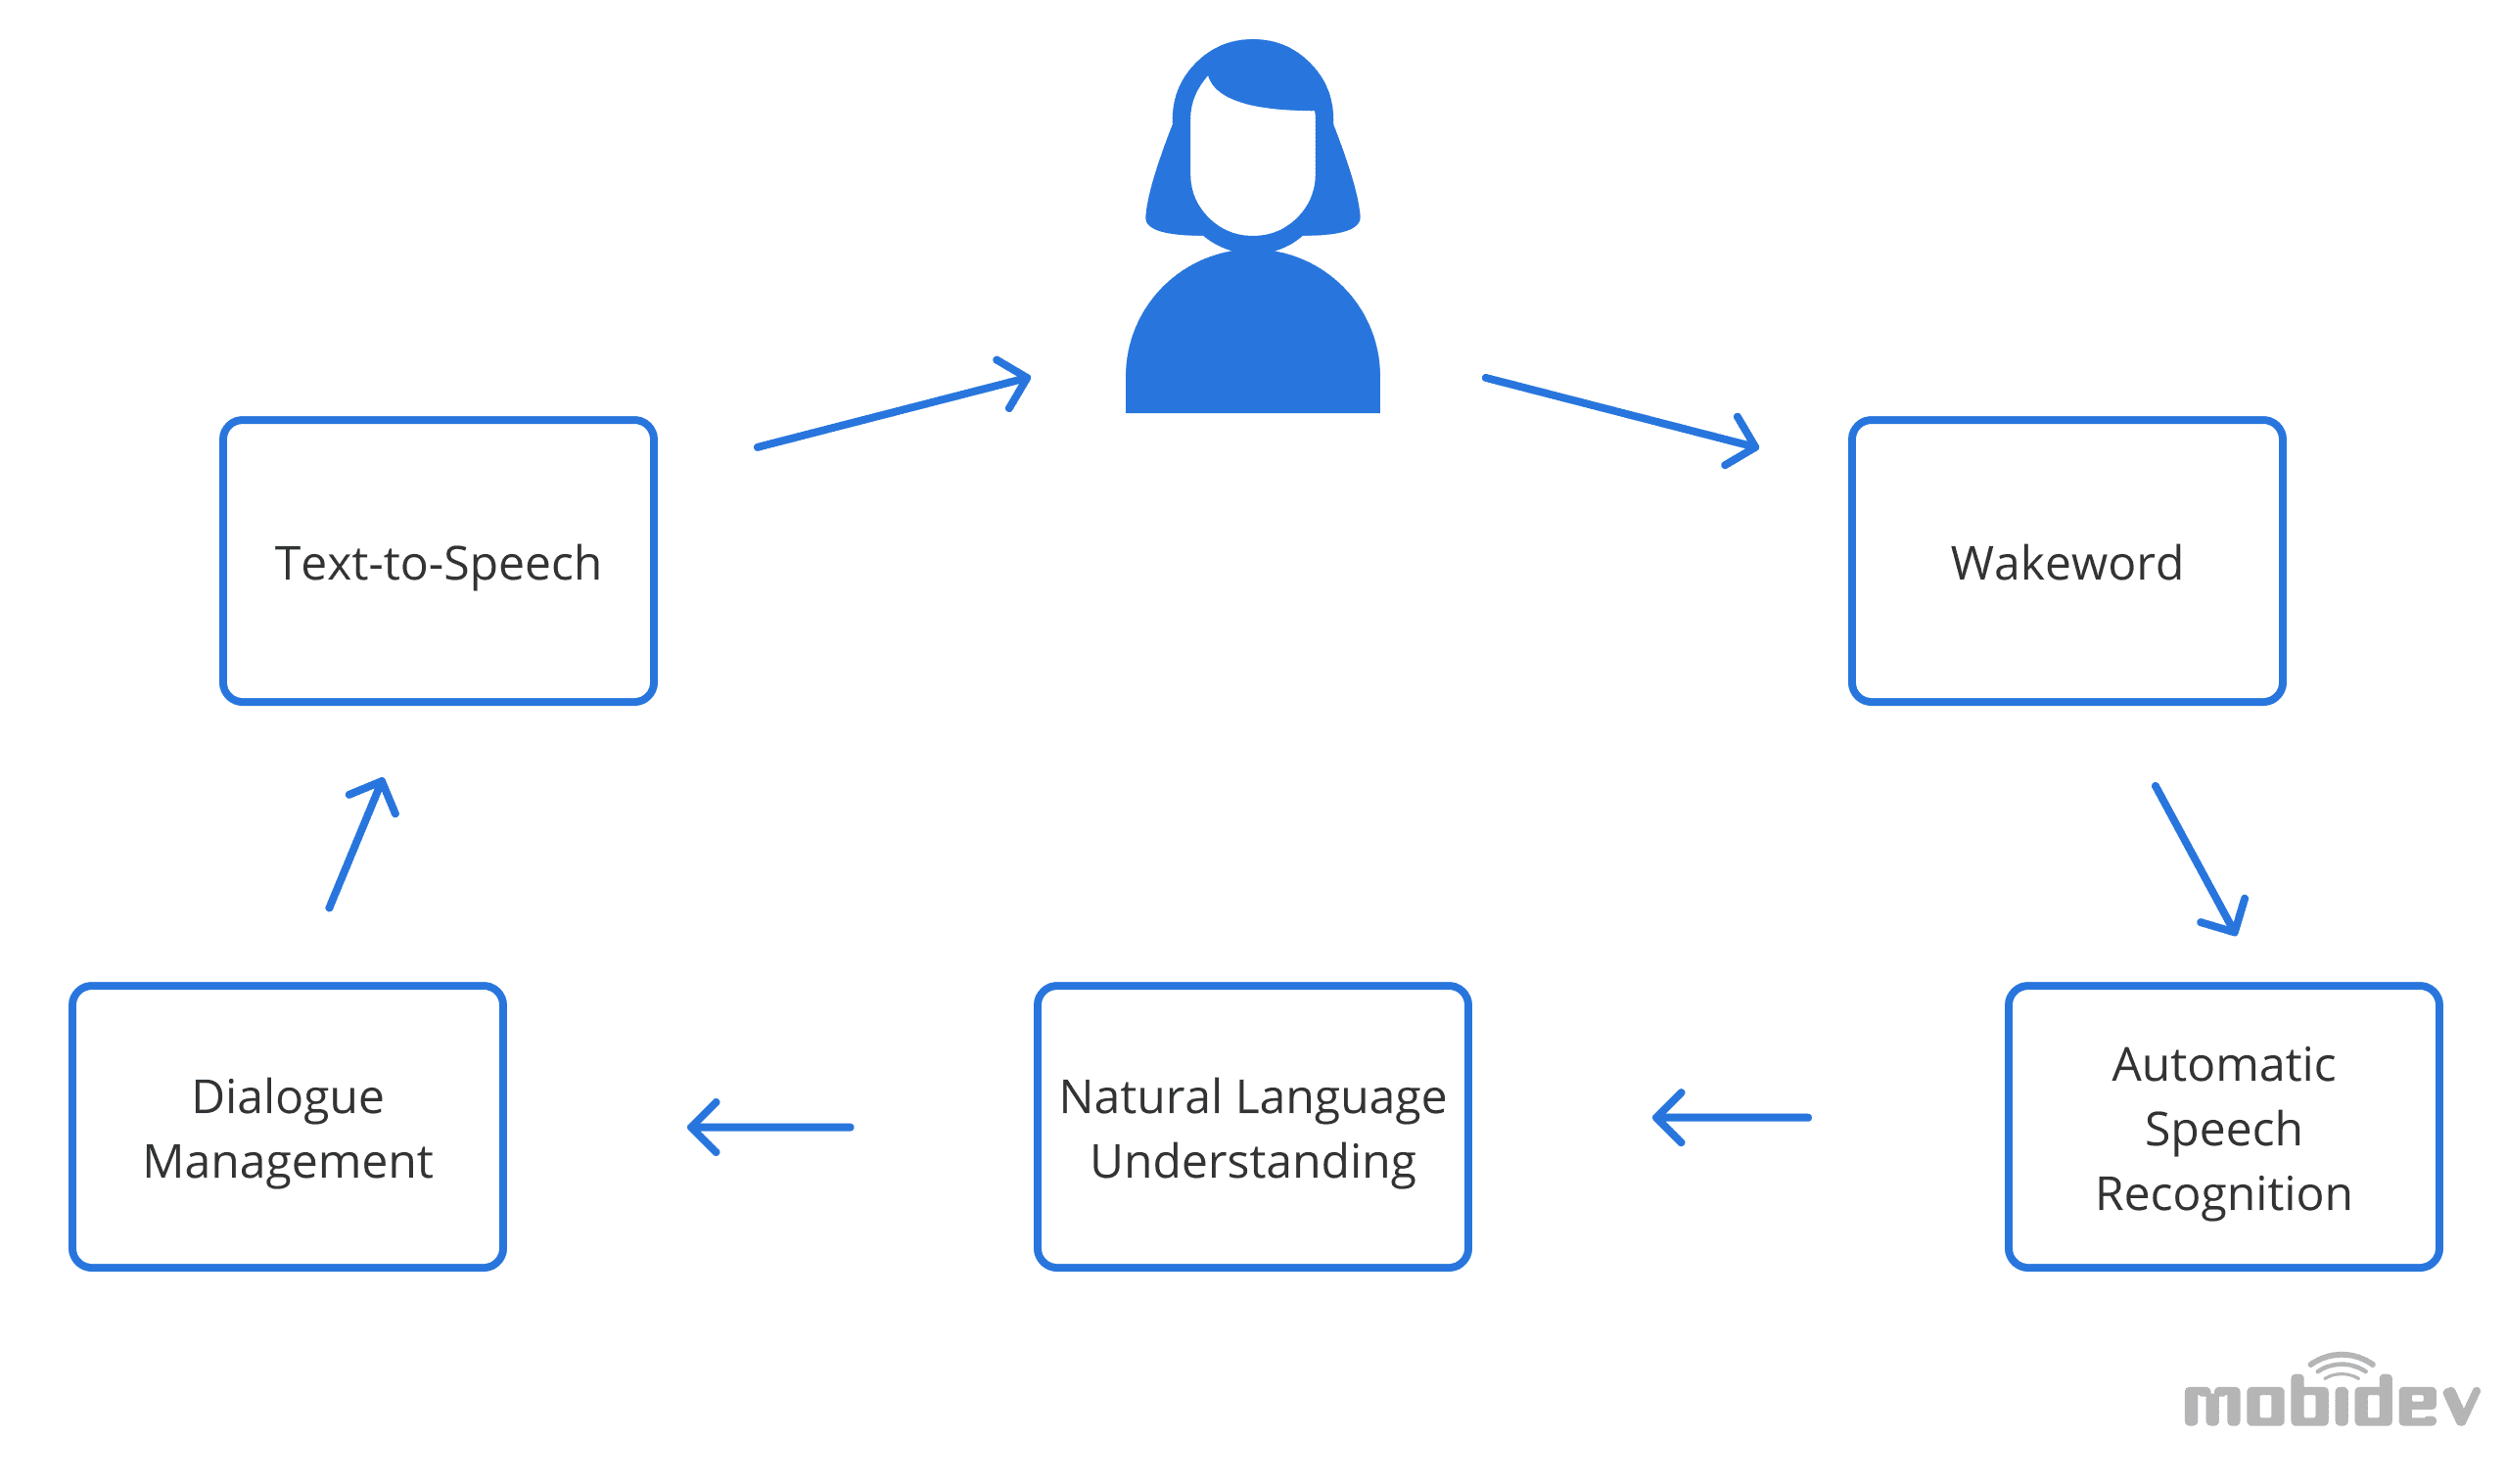 How the text-to-speech process works